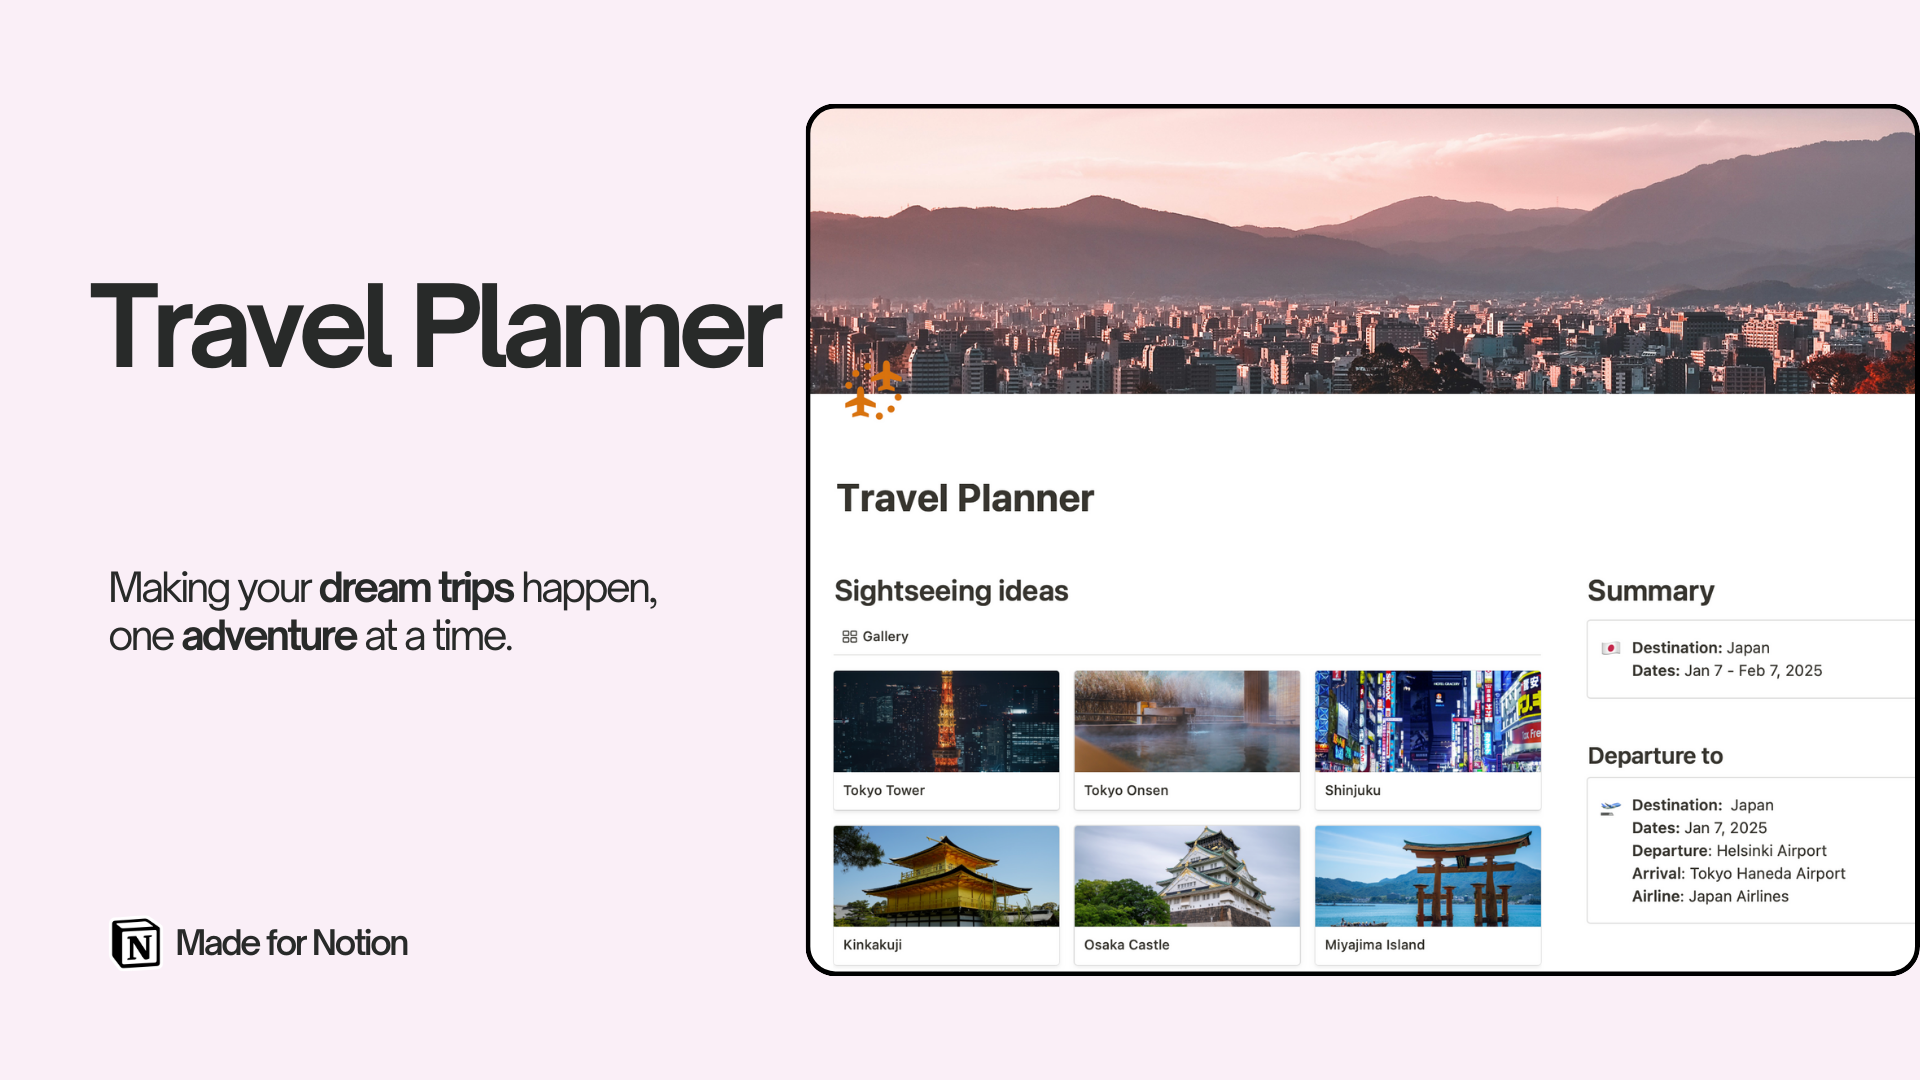 This Travel Planner template in Notion helps you to craft your dream adventures, whether it's a weekend escape or a month-long journey.